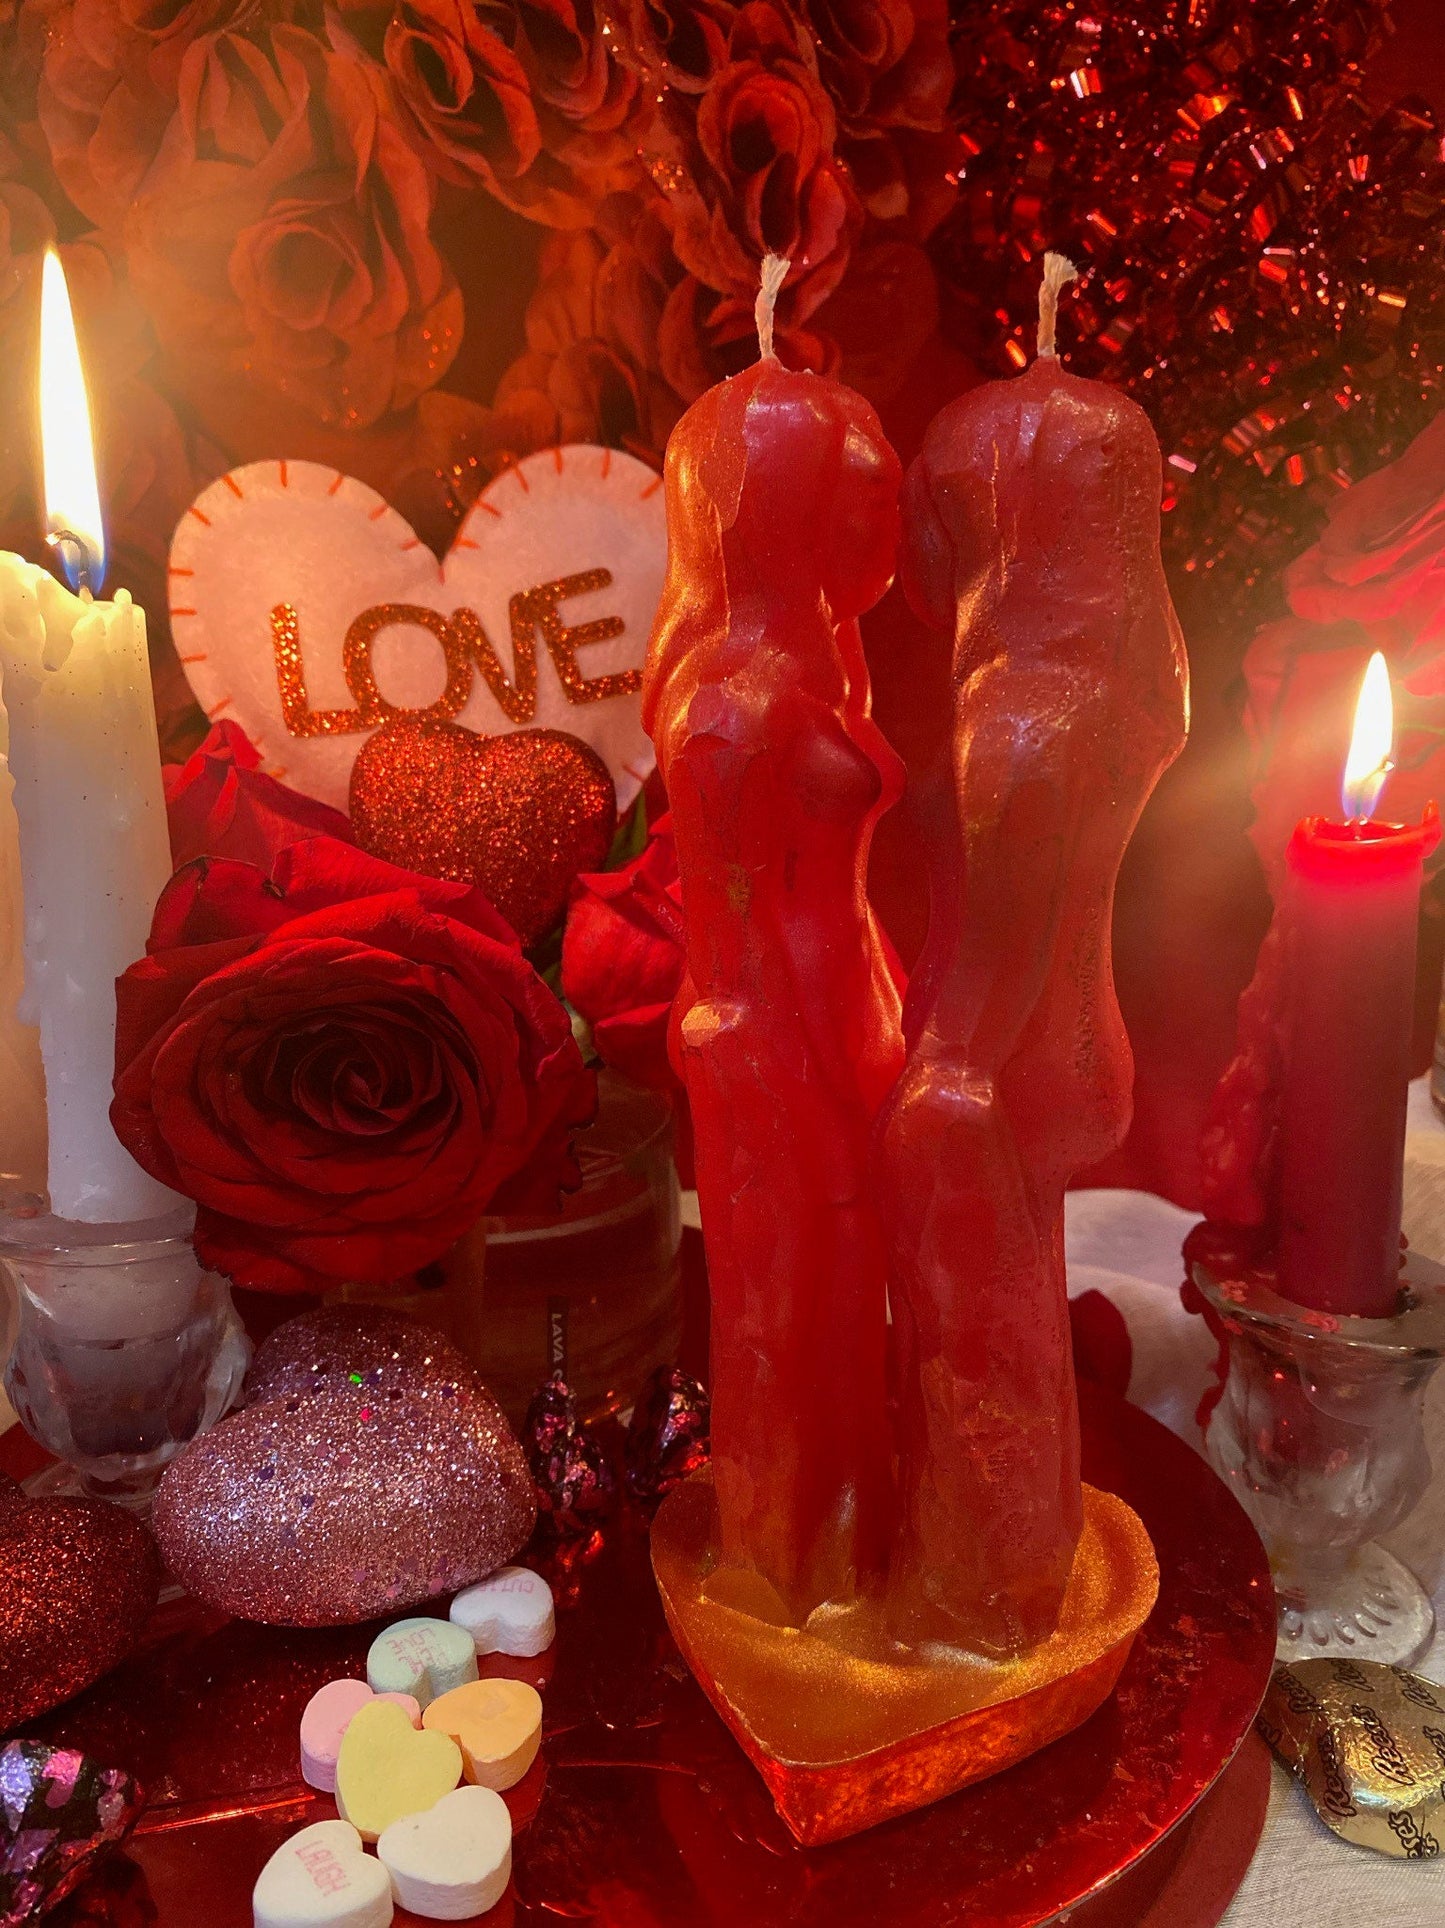 Lesbian Lovers Candle + Passion + Binding + Wives + Marriage + Brides + Female Friendship